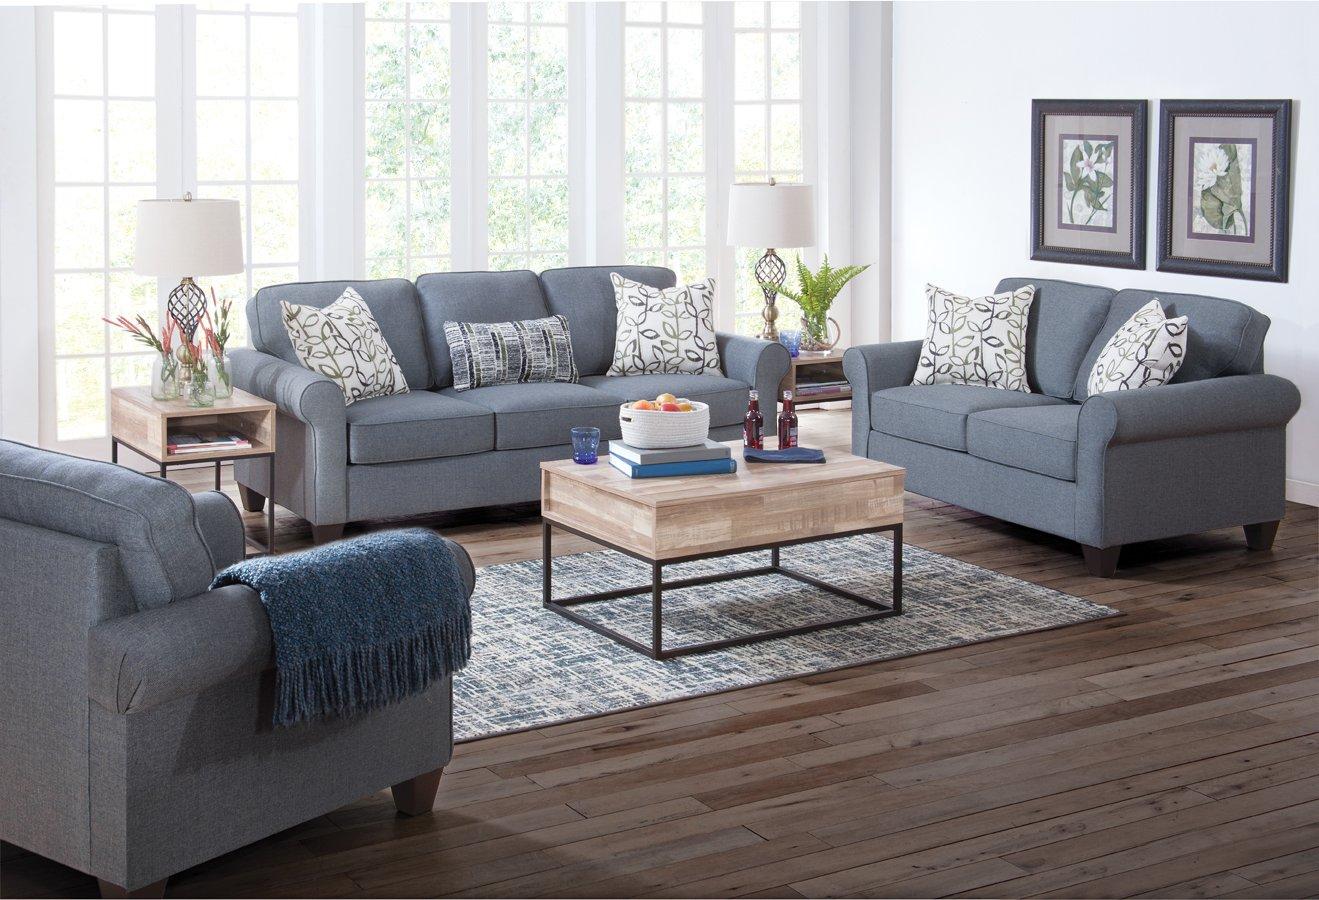 Rent to Own Woodhaven 3 - Piece Trudy Sofa, Loveseat & Chair at Aaron's ...